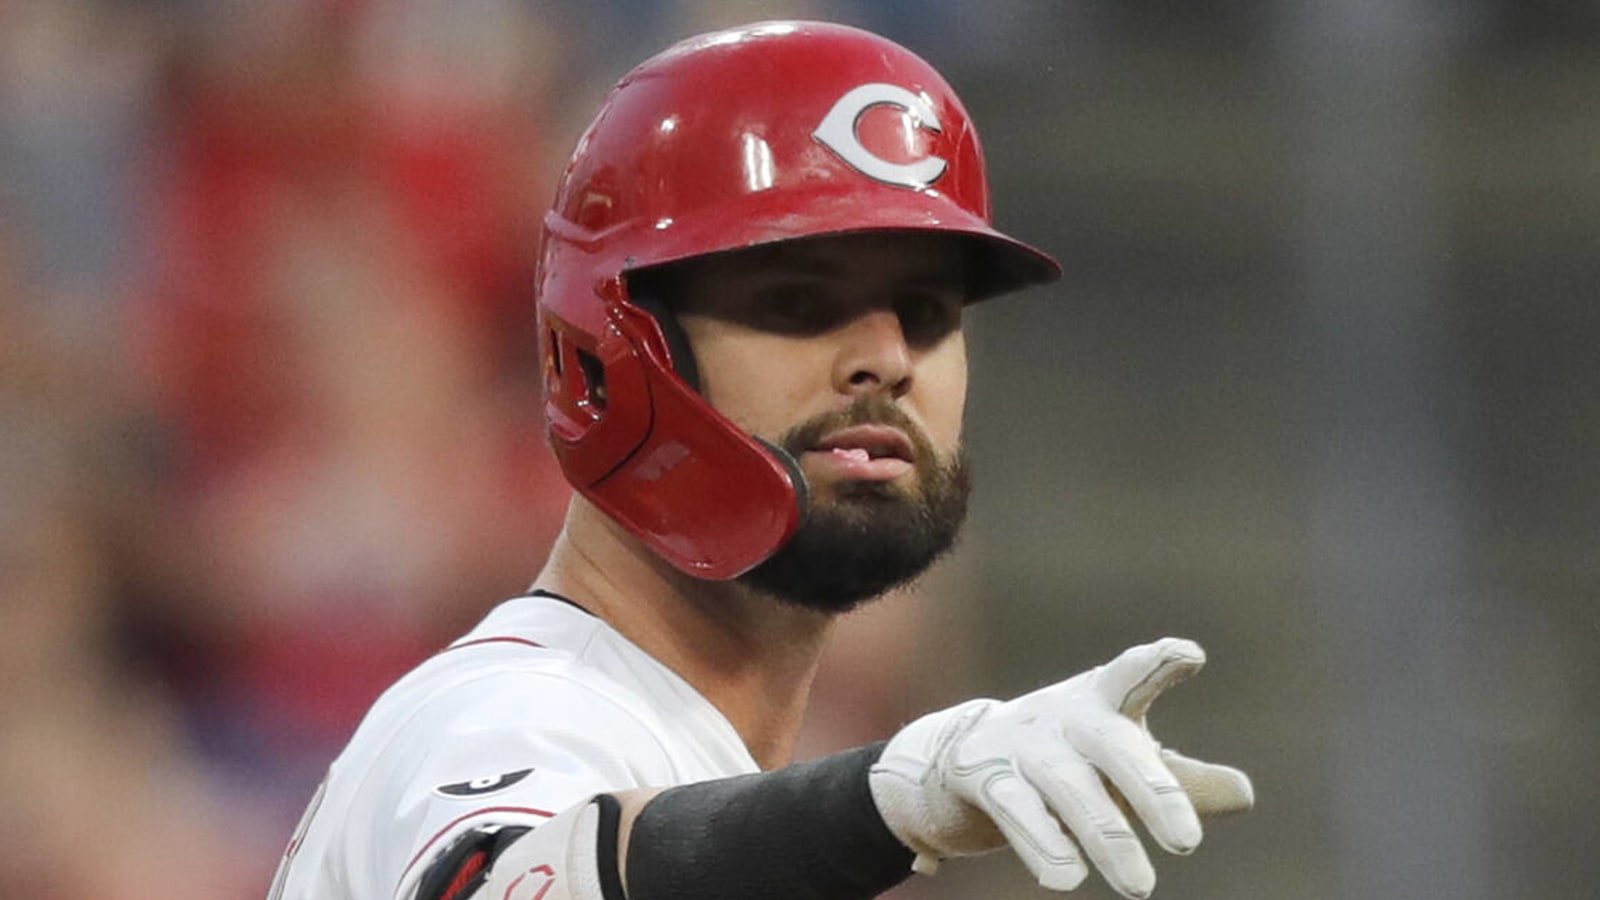 Mariners acquire OF Jesse Winker, 3B Eugenio Suarez in trade with Reds